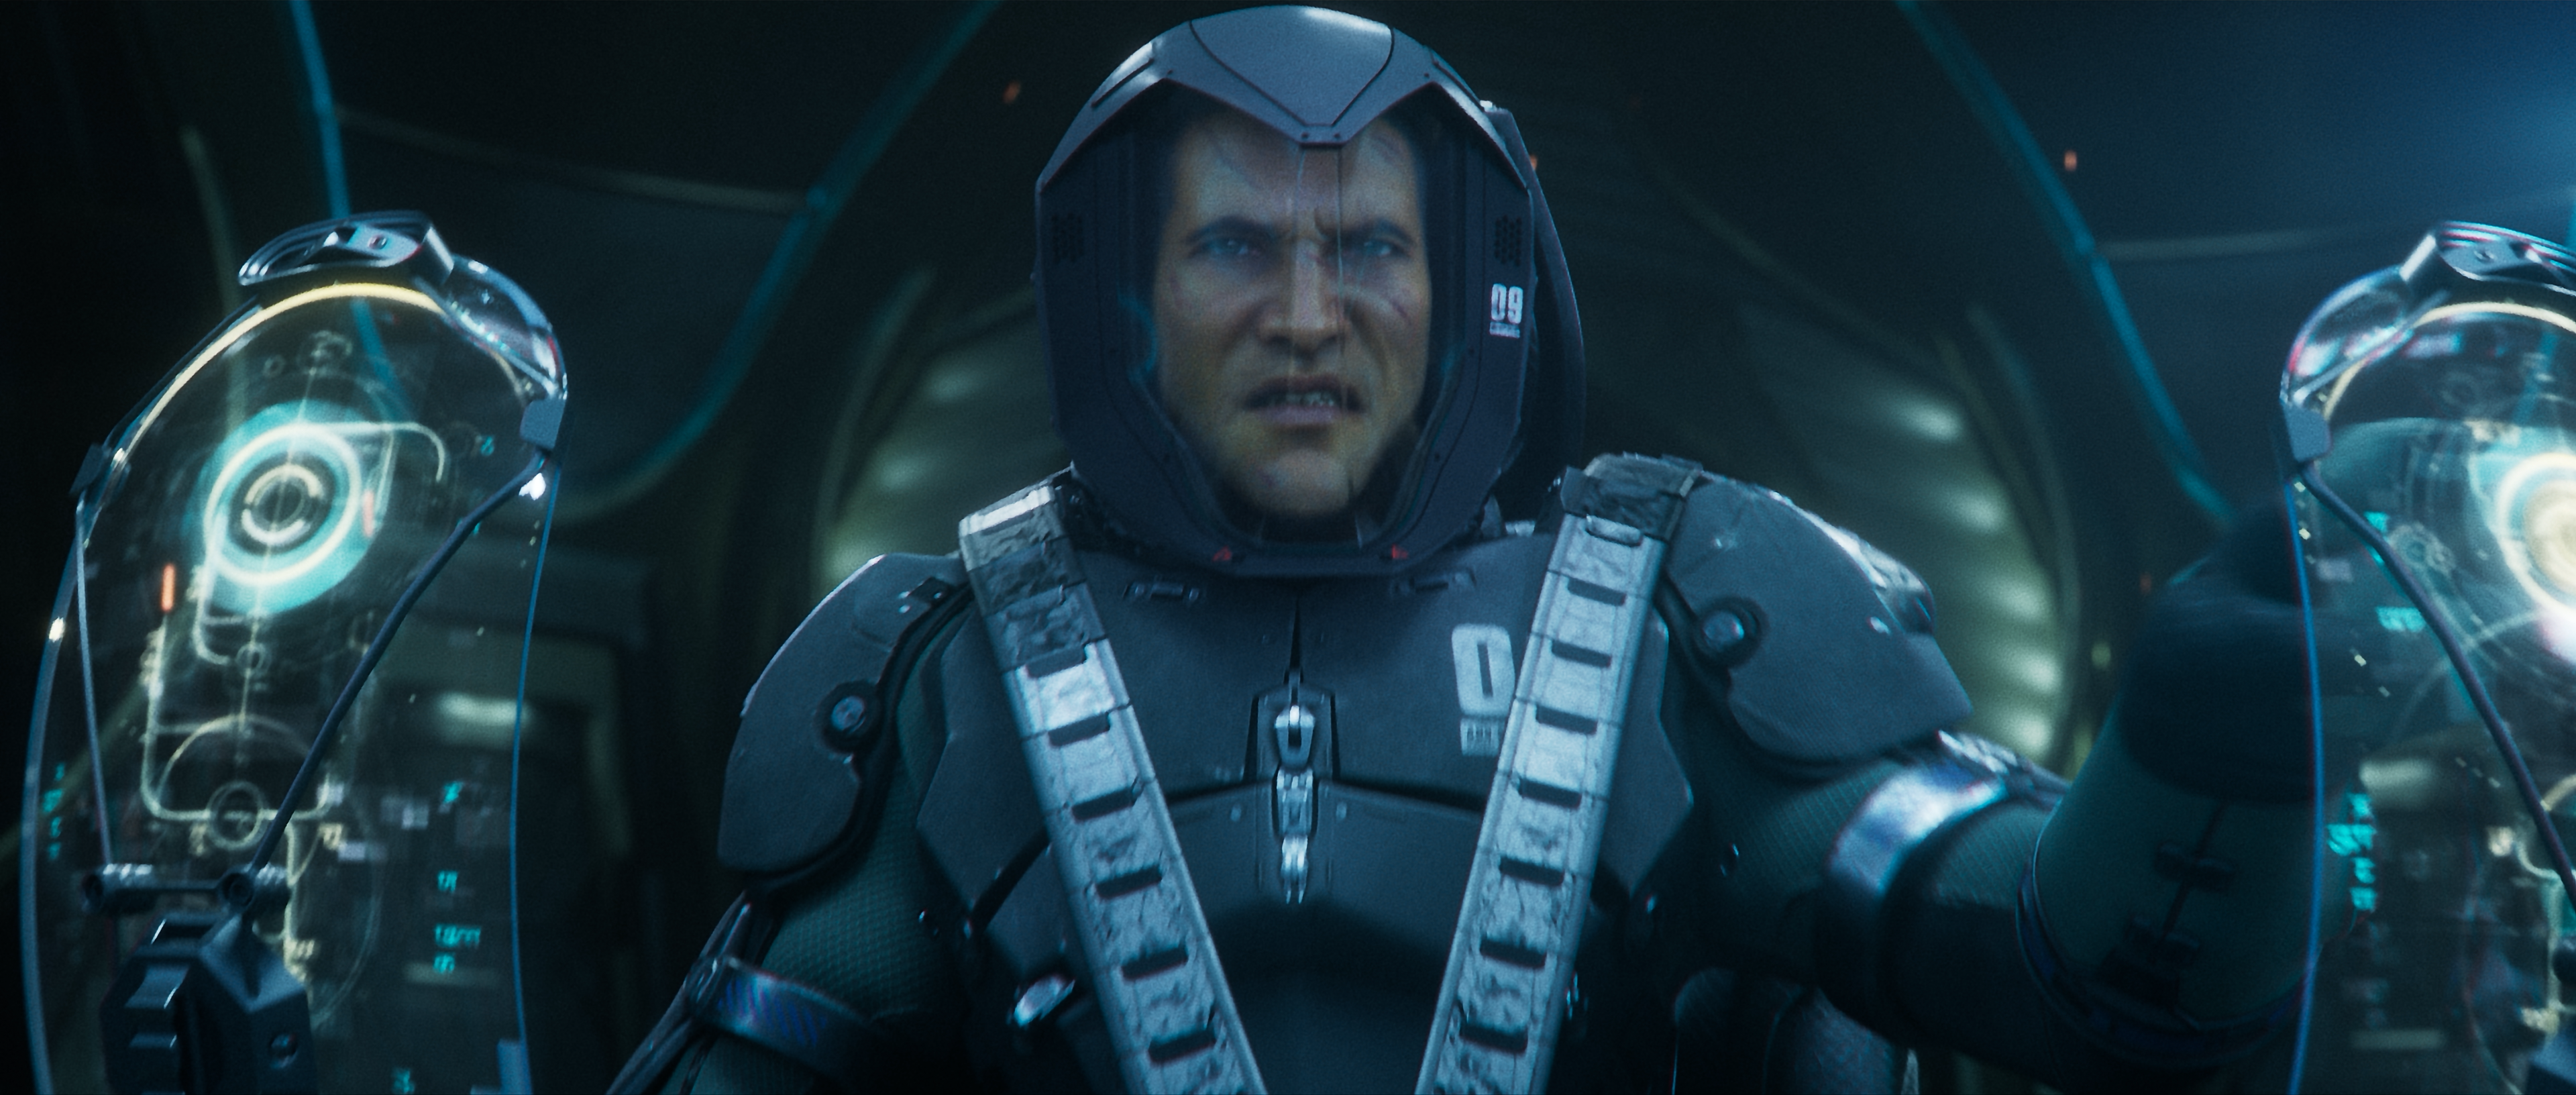 The protagonist of Exodus braces himself in a drop pod as it falls from a spaceship